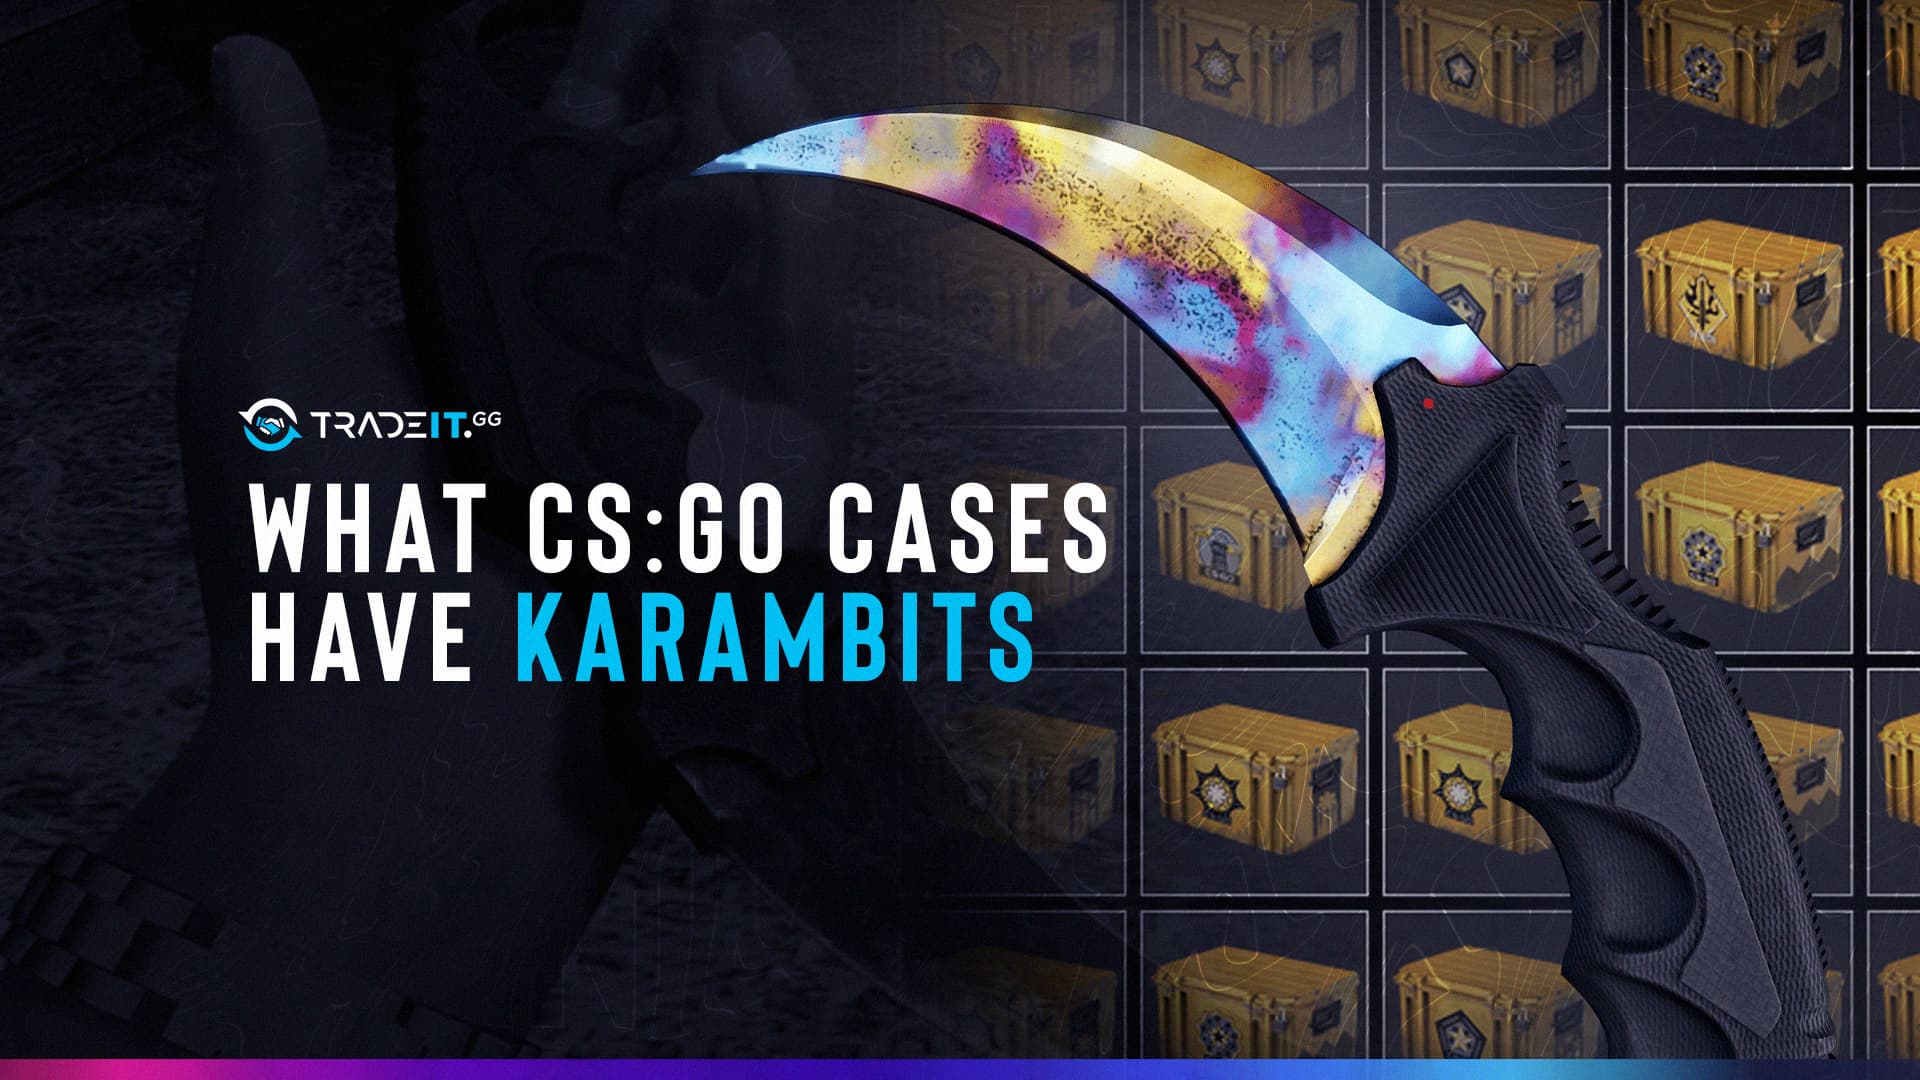 What Cases Karambits